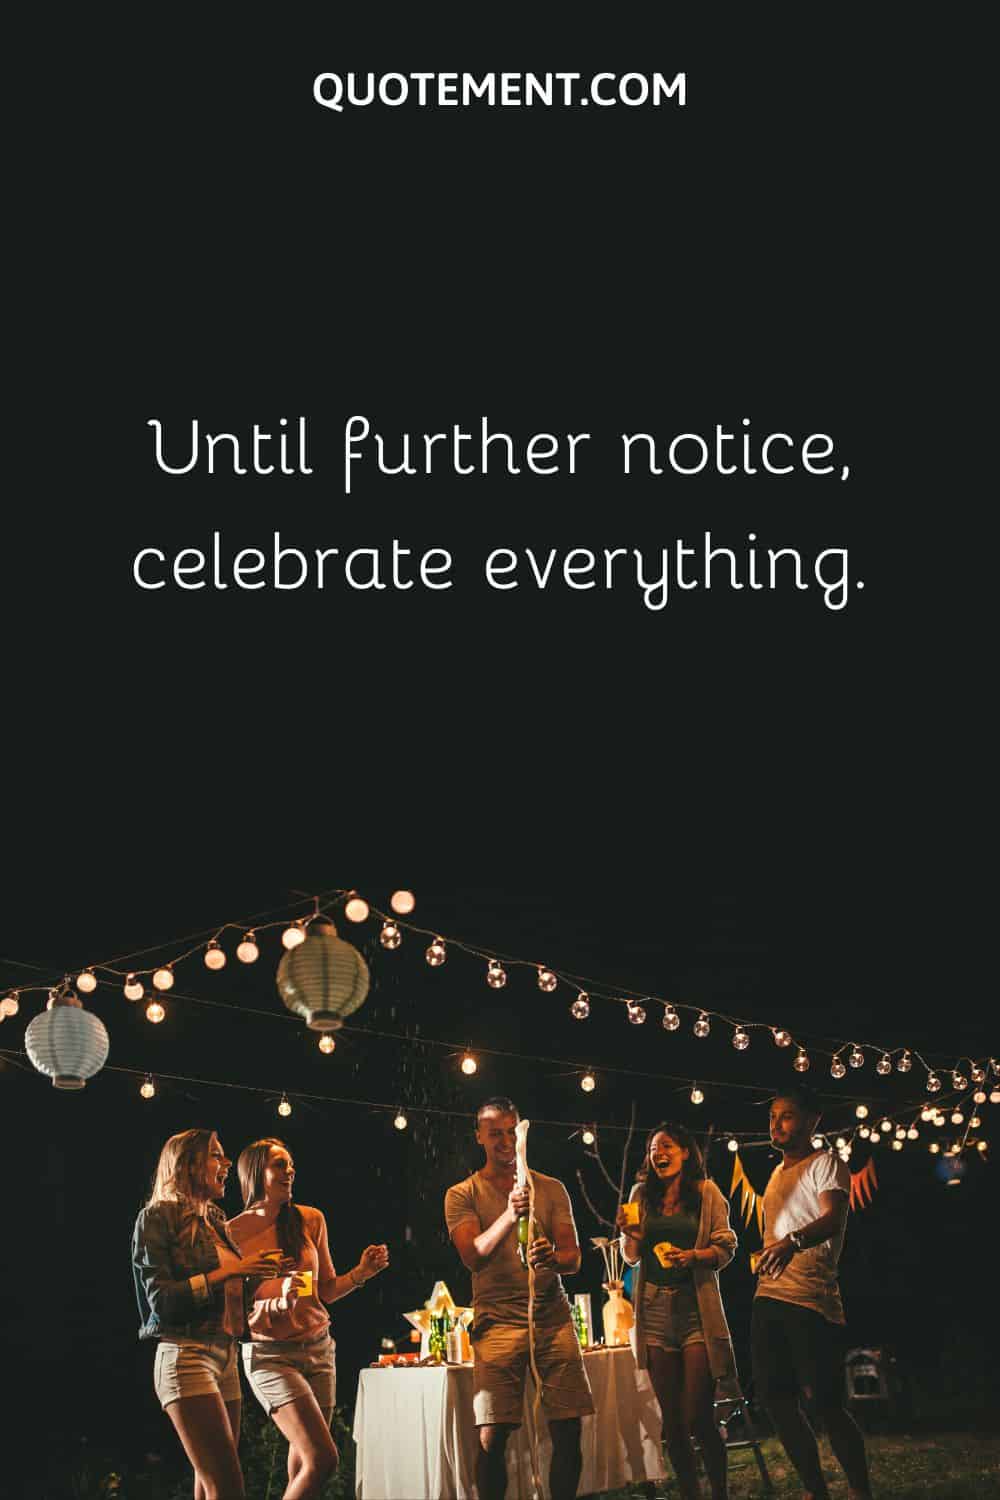 Until further notice, celebrate everything